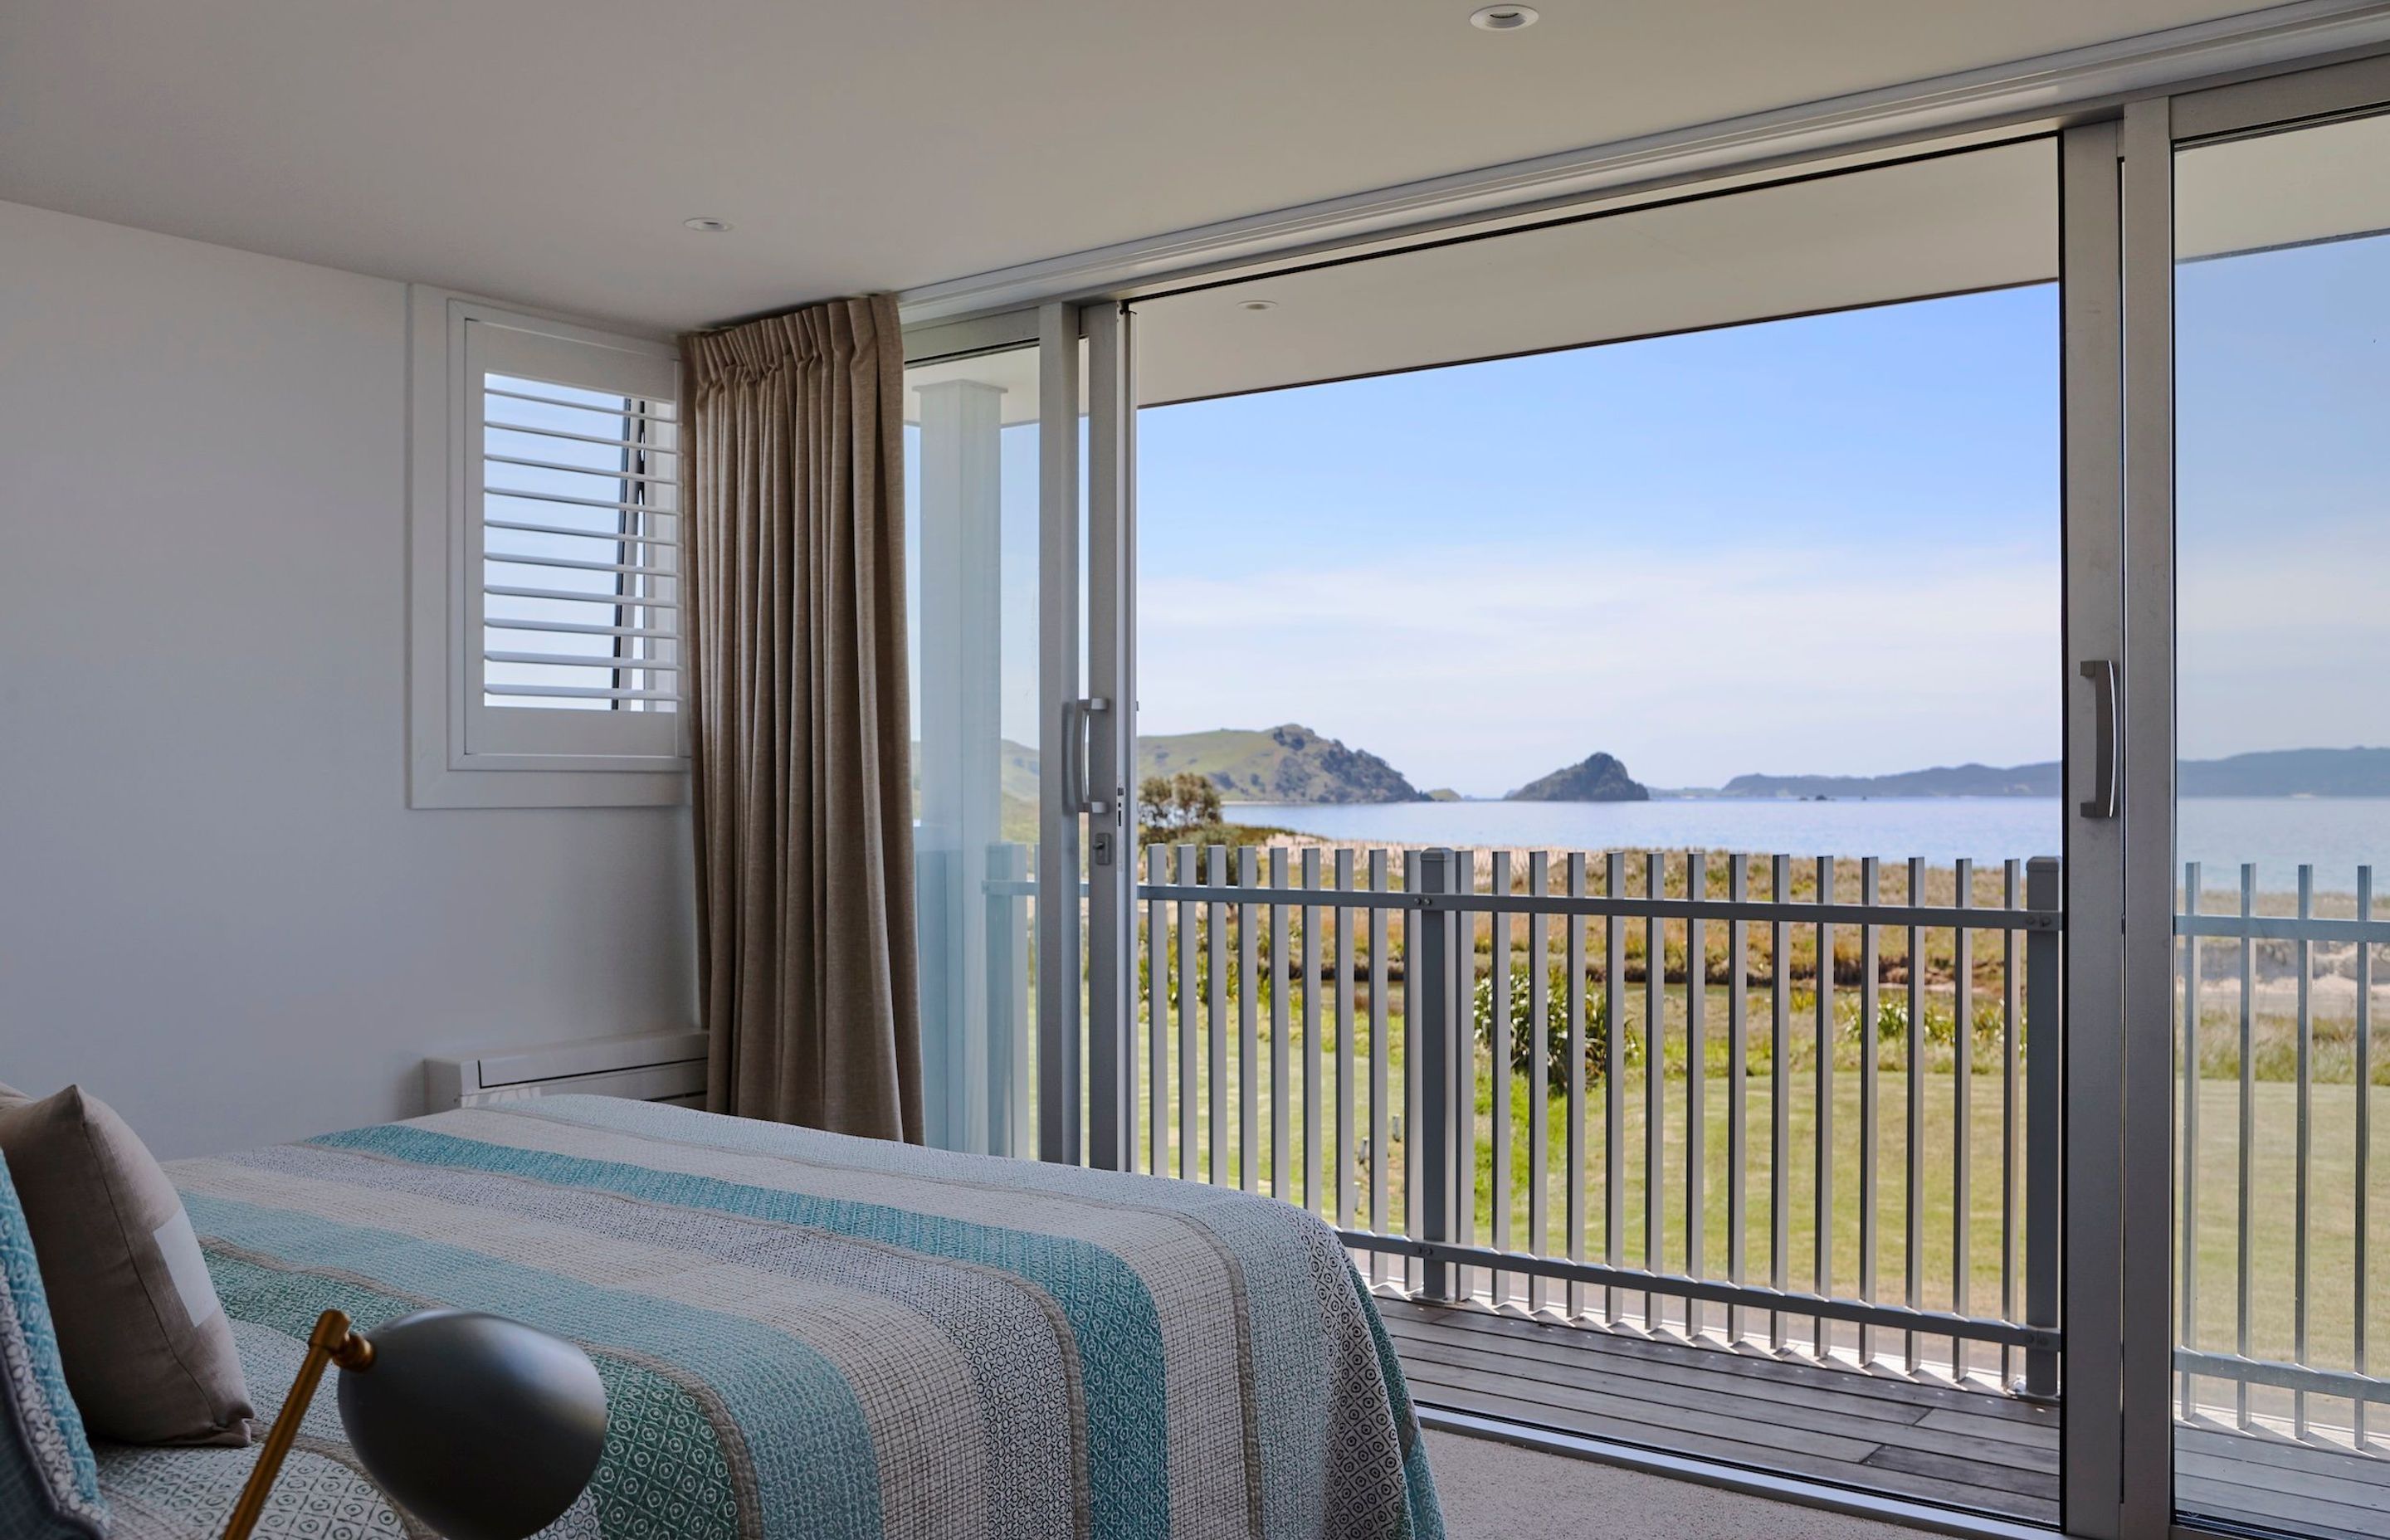 The client brief was to have the master bedroom upstairs so they could get the best view of the beach.